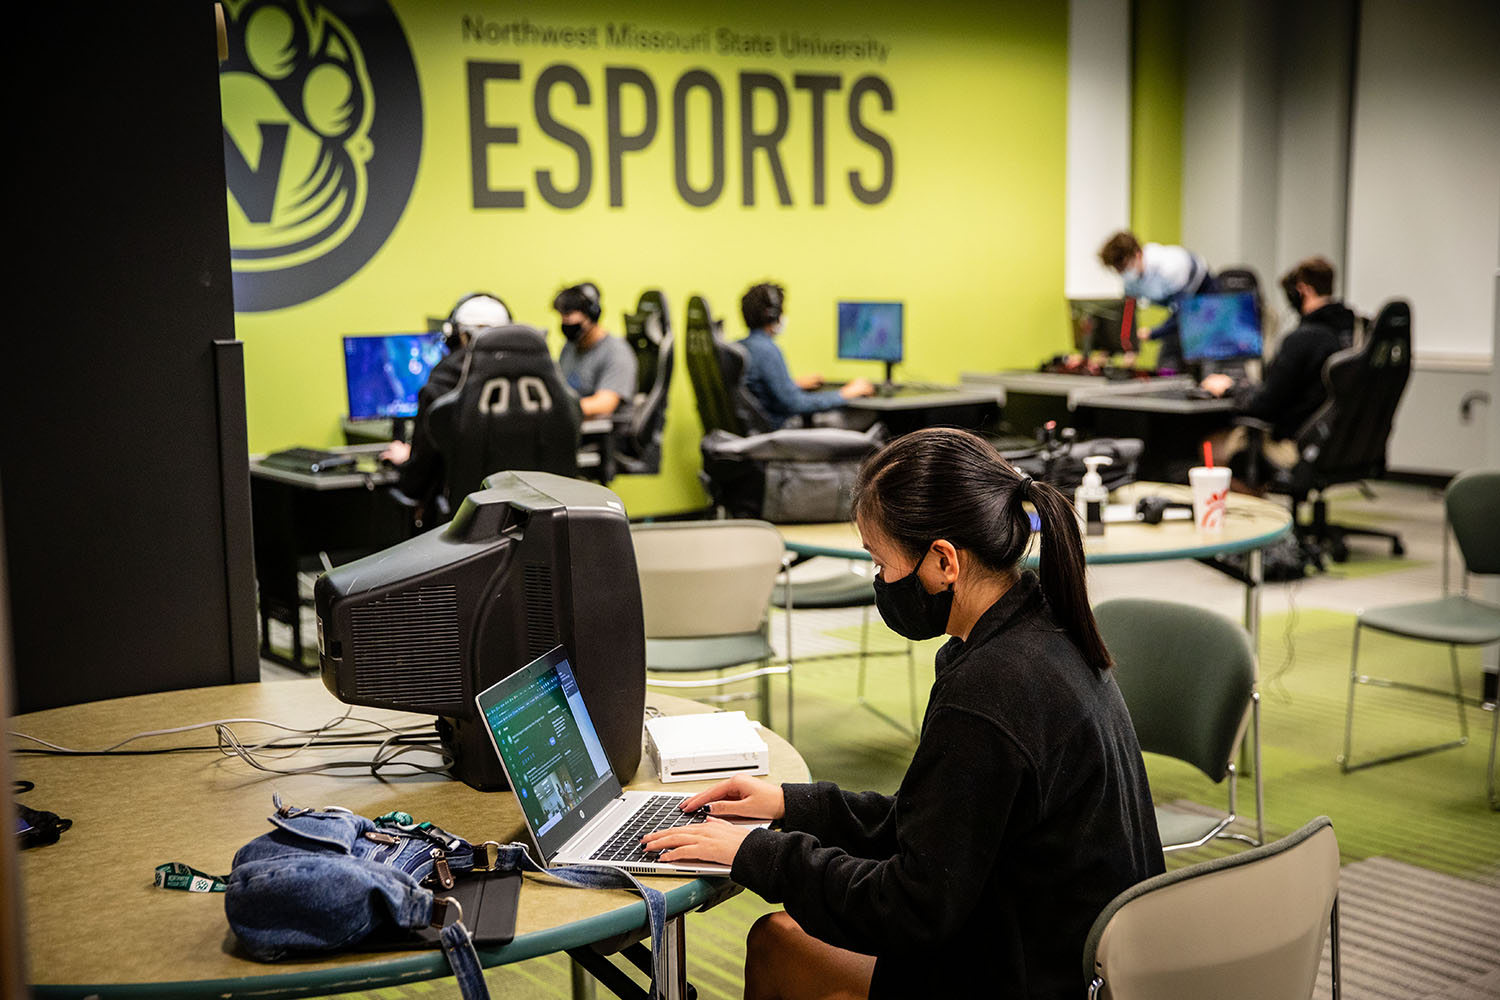 Northwest's esports room is outfitted with a variety of gaming centers and furnishings to support student engagement as well as the competitive video gaming environment.